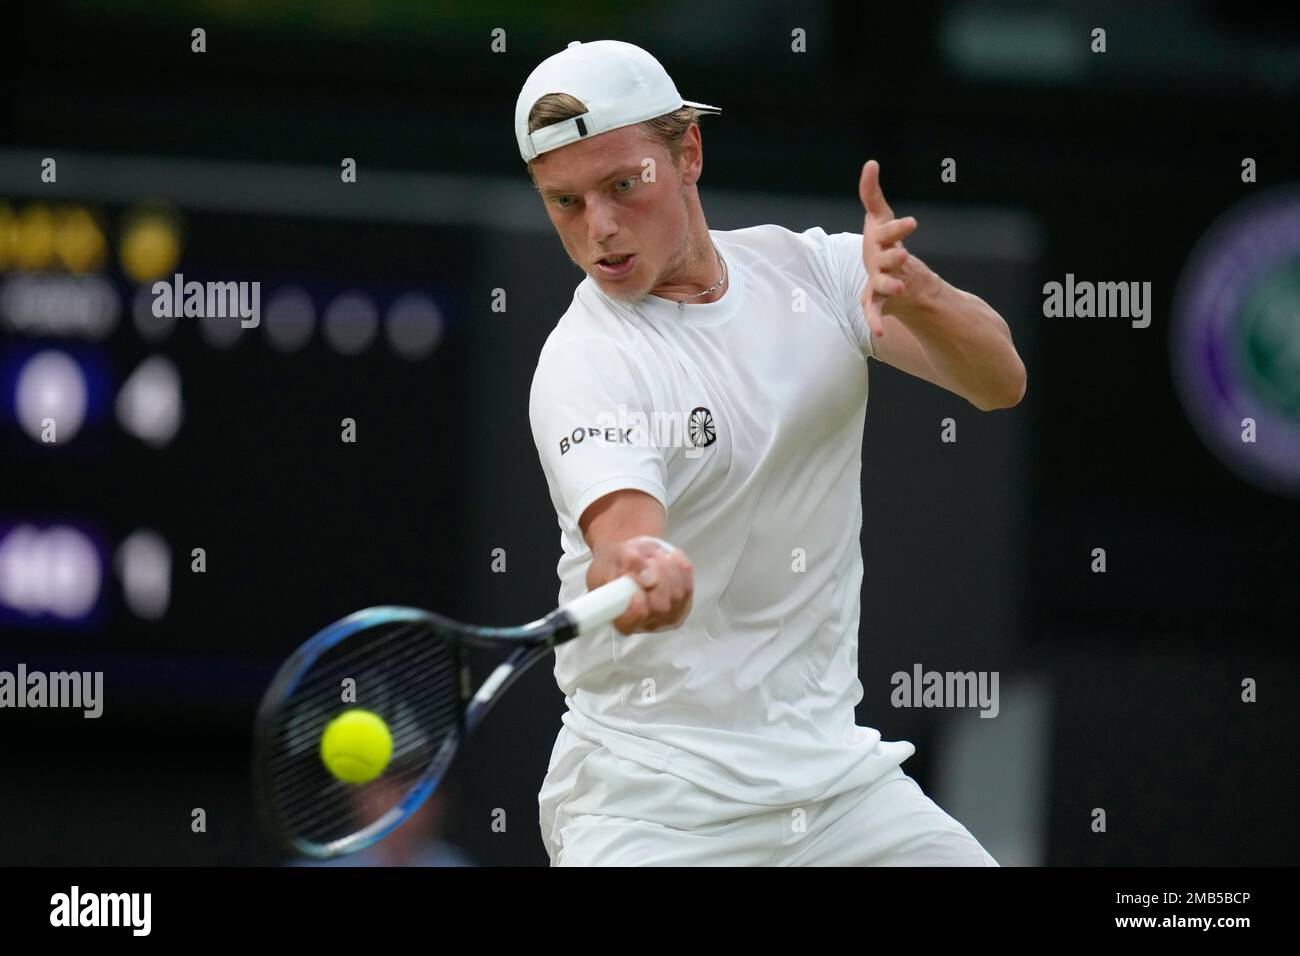 Tim van Rijthoven of the Netherlands returns the ball to Serbias Novak Djokovic during a mens fourth round singles match on day seven of the Wimbledon tennis championships in London, Sunday, July